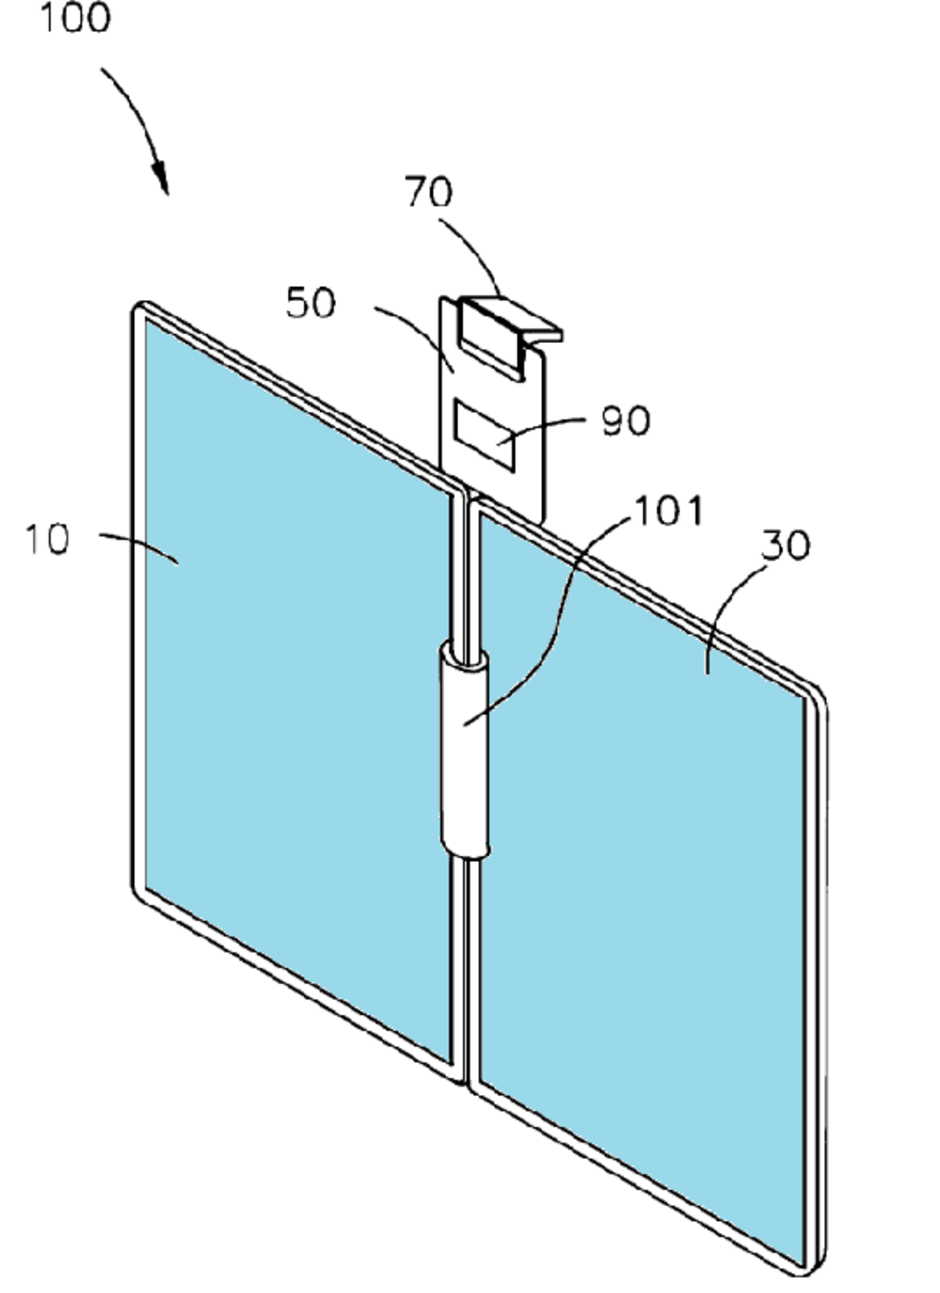 Another image from Oppo's patent application - A future OnePlus model could feature a pop-up display